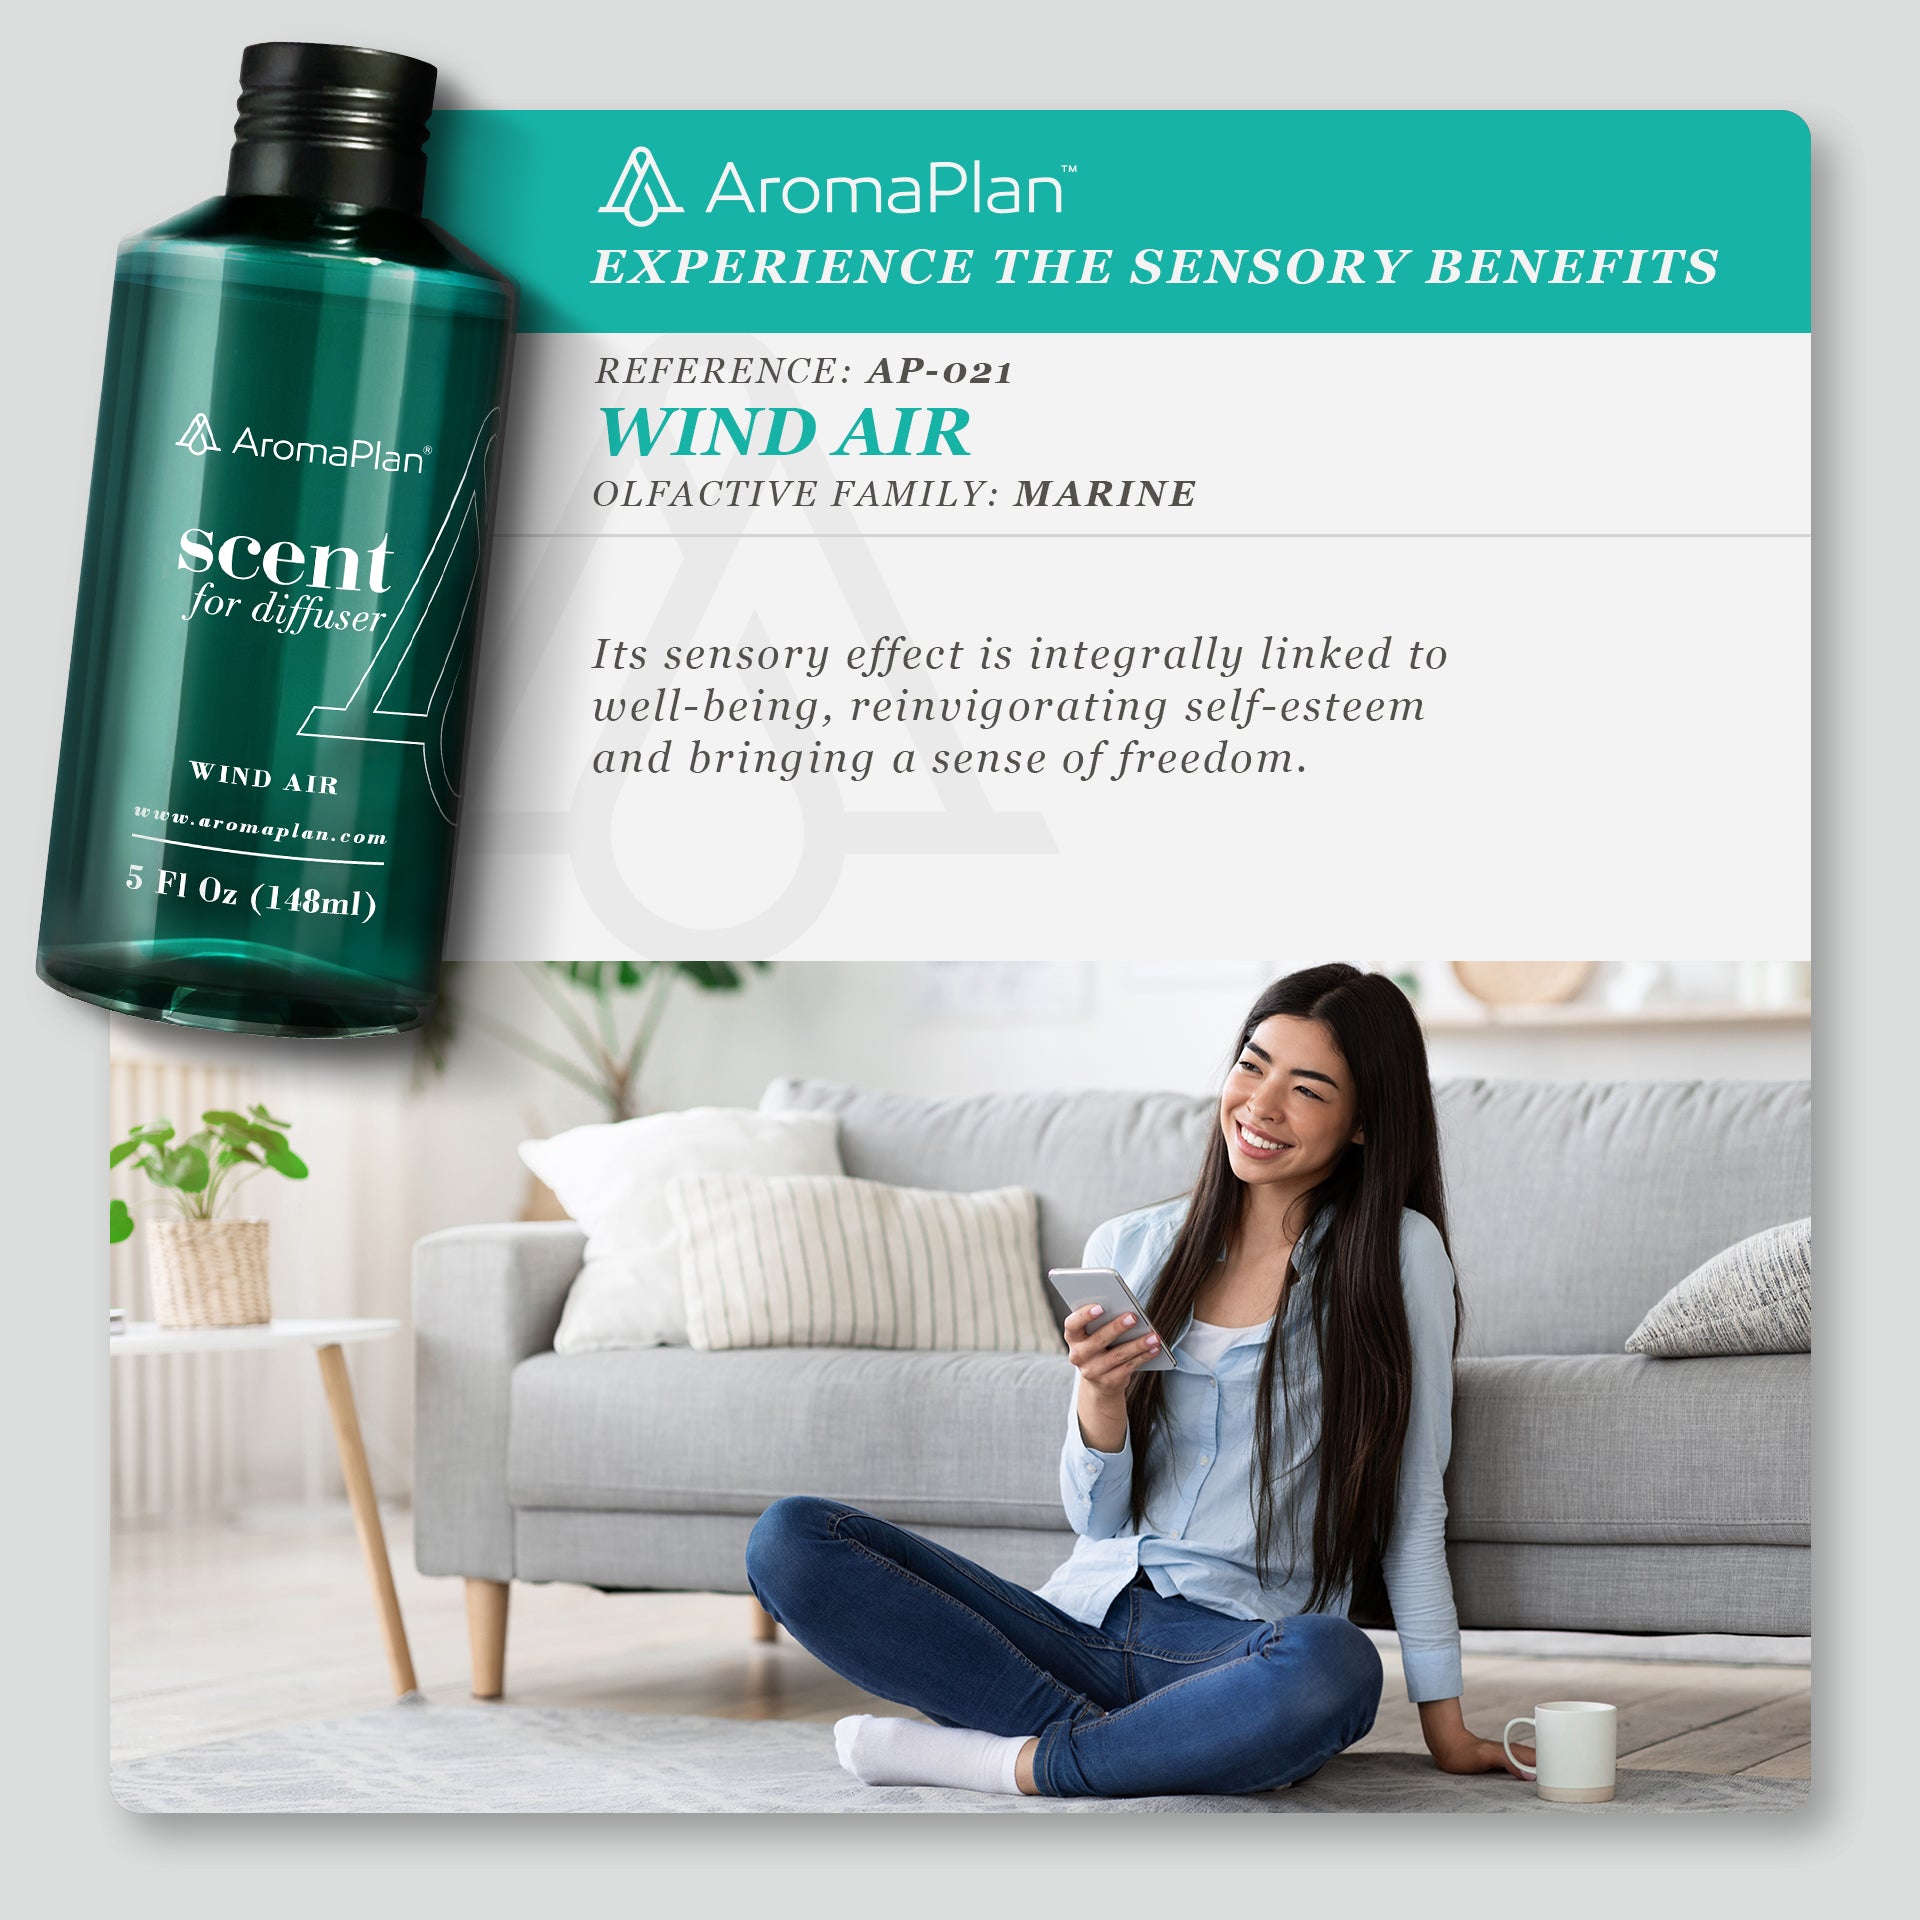 Discover the Scent Wind Air is inspired by Osklen Brazil